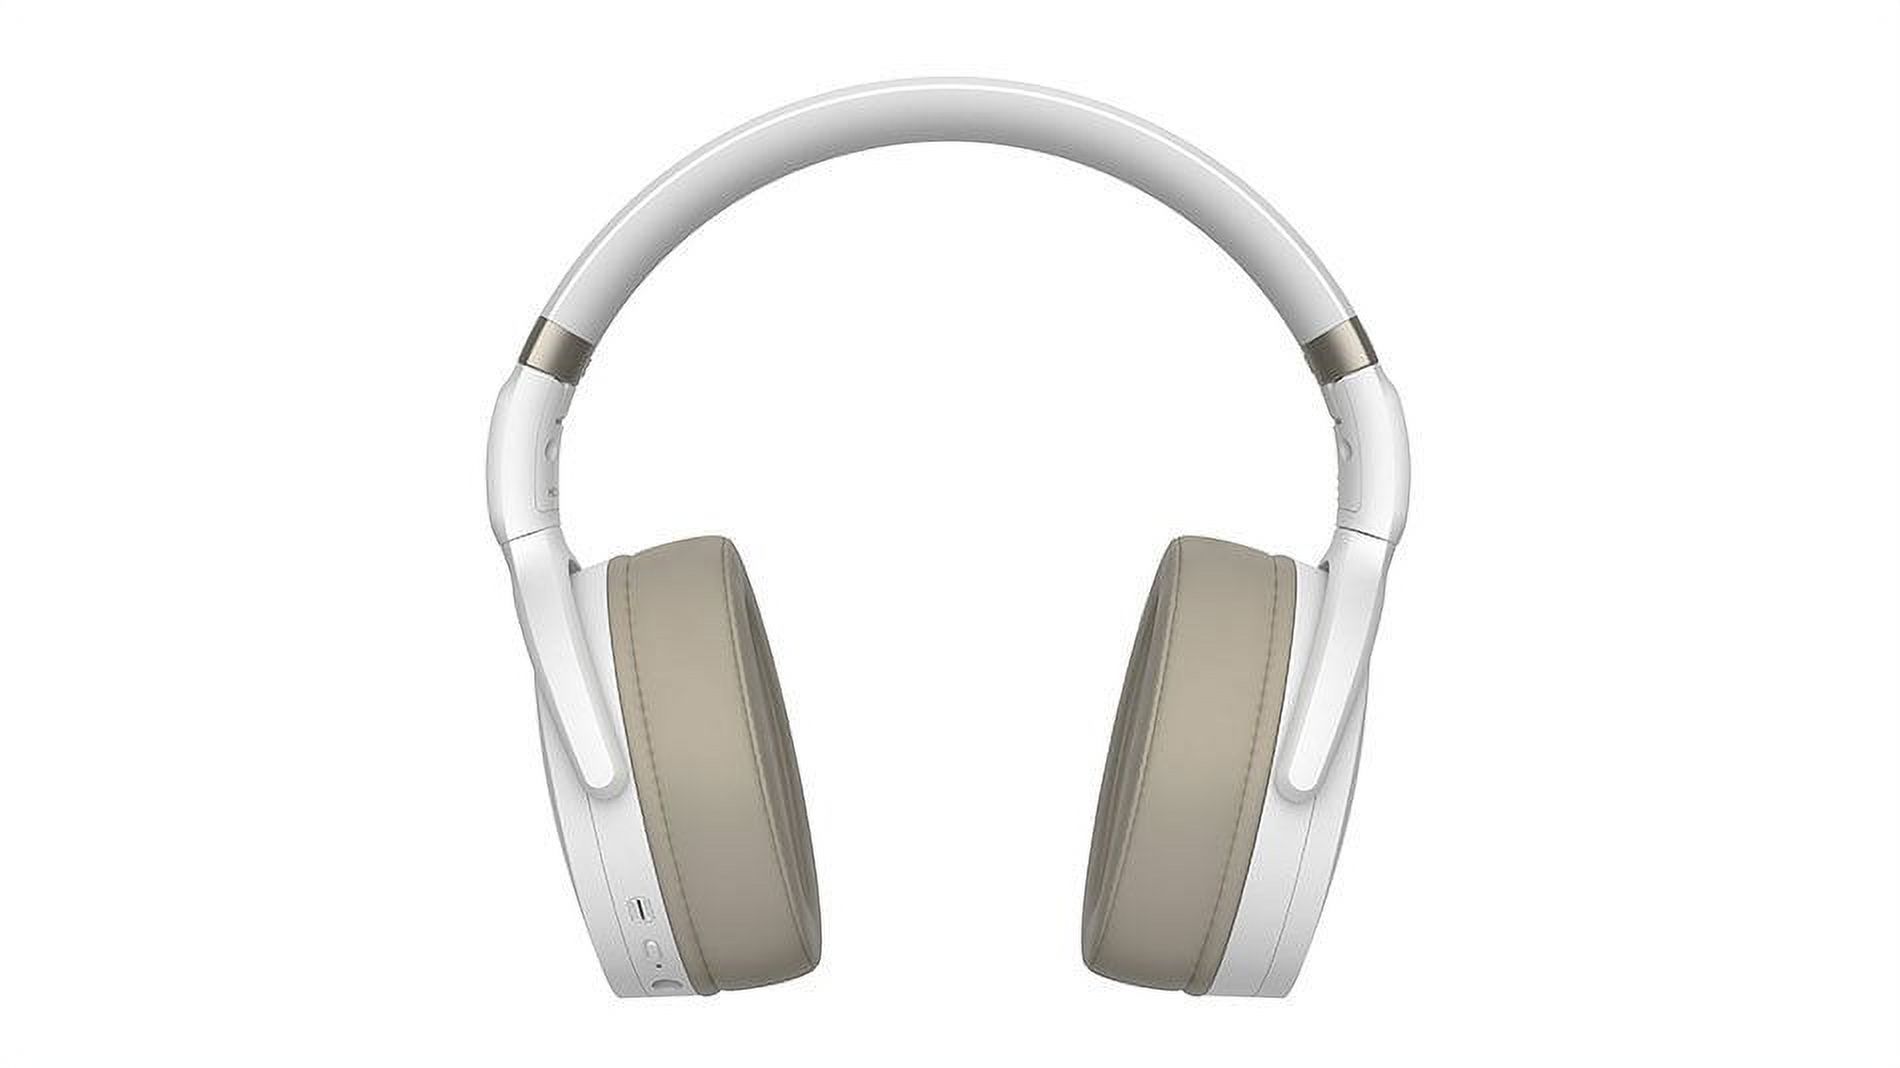 SENNHEISER HD 450BT Bluetooth 5.0 Wireless Headphone with Active Noise Cancellation - 30-Hour Battery Life, USB-C Fast Charging, Virtual Assistant Button, Foldable - White - image 2 of 6